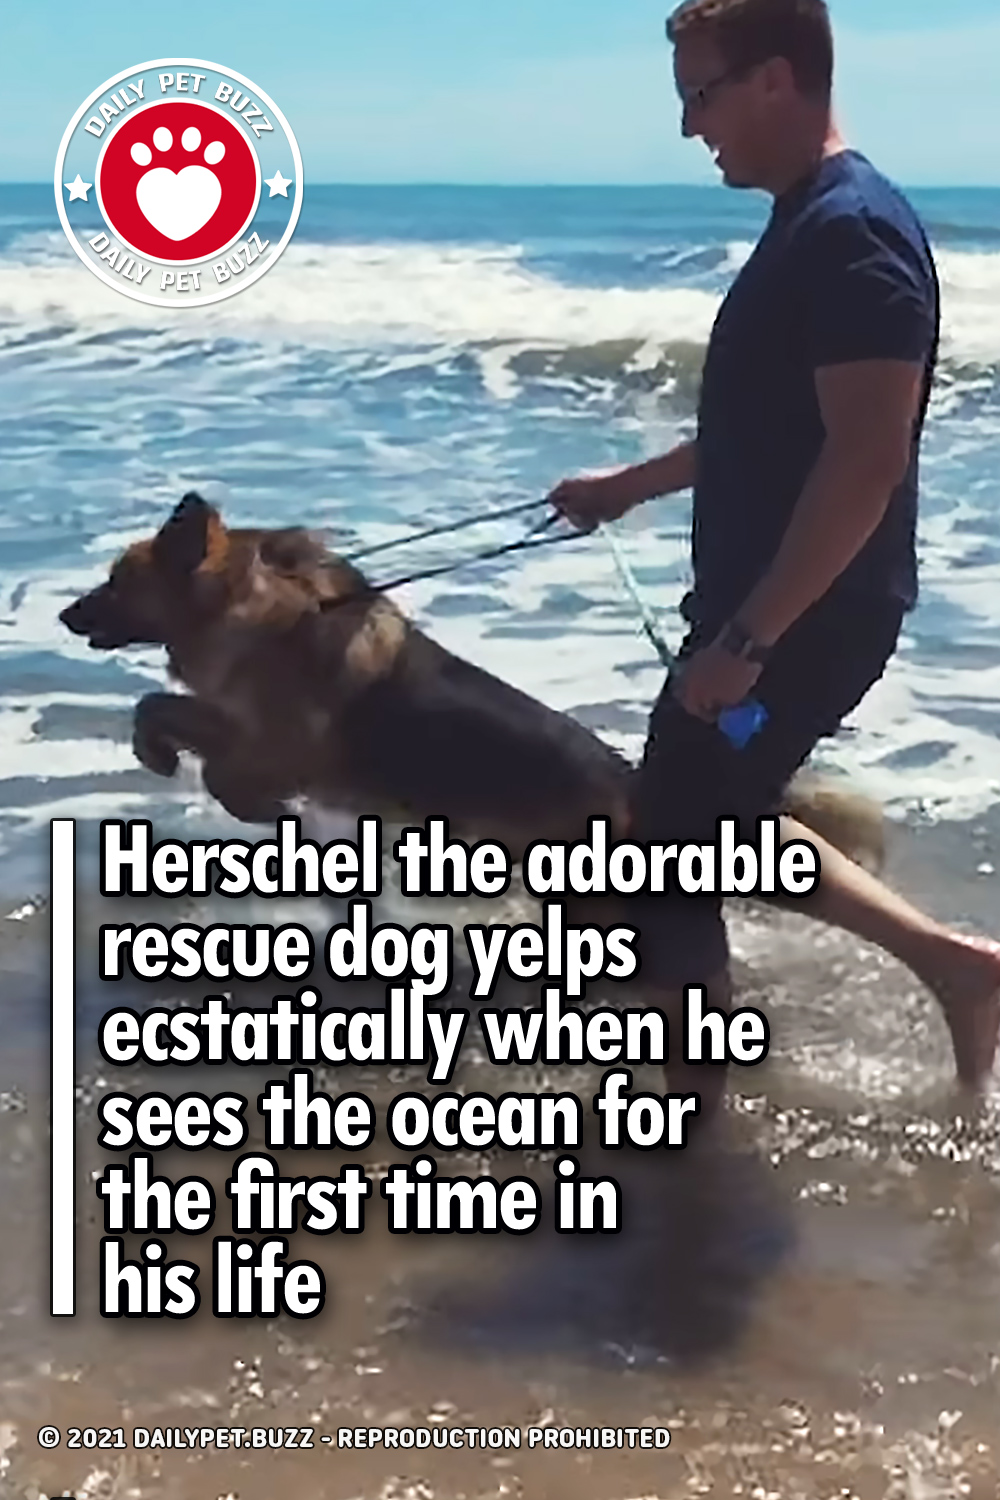 Herschel the adorable rescue dog yelps ecstatically when he sees the ocean for the first time in his life